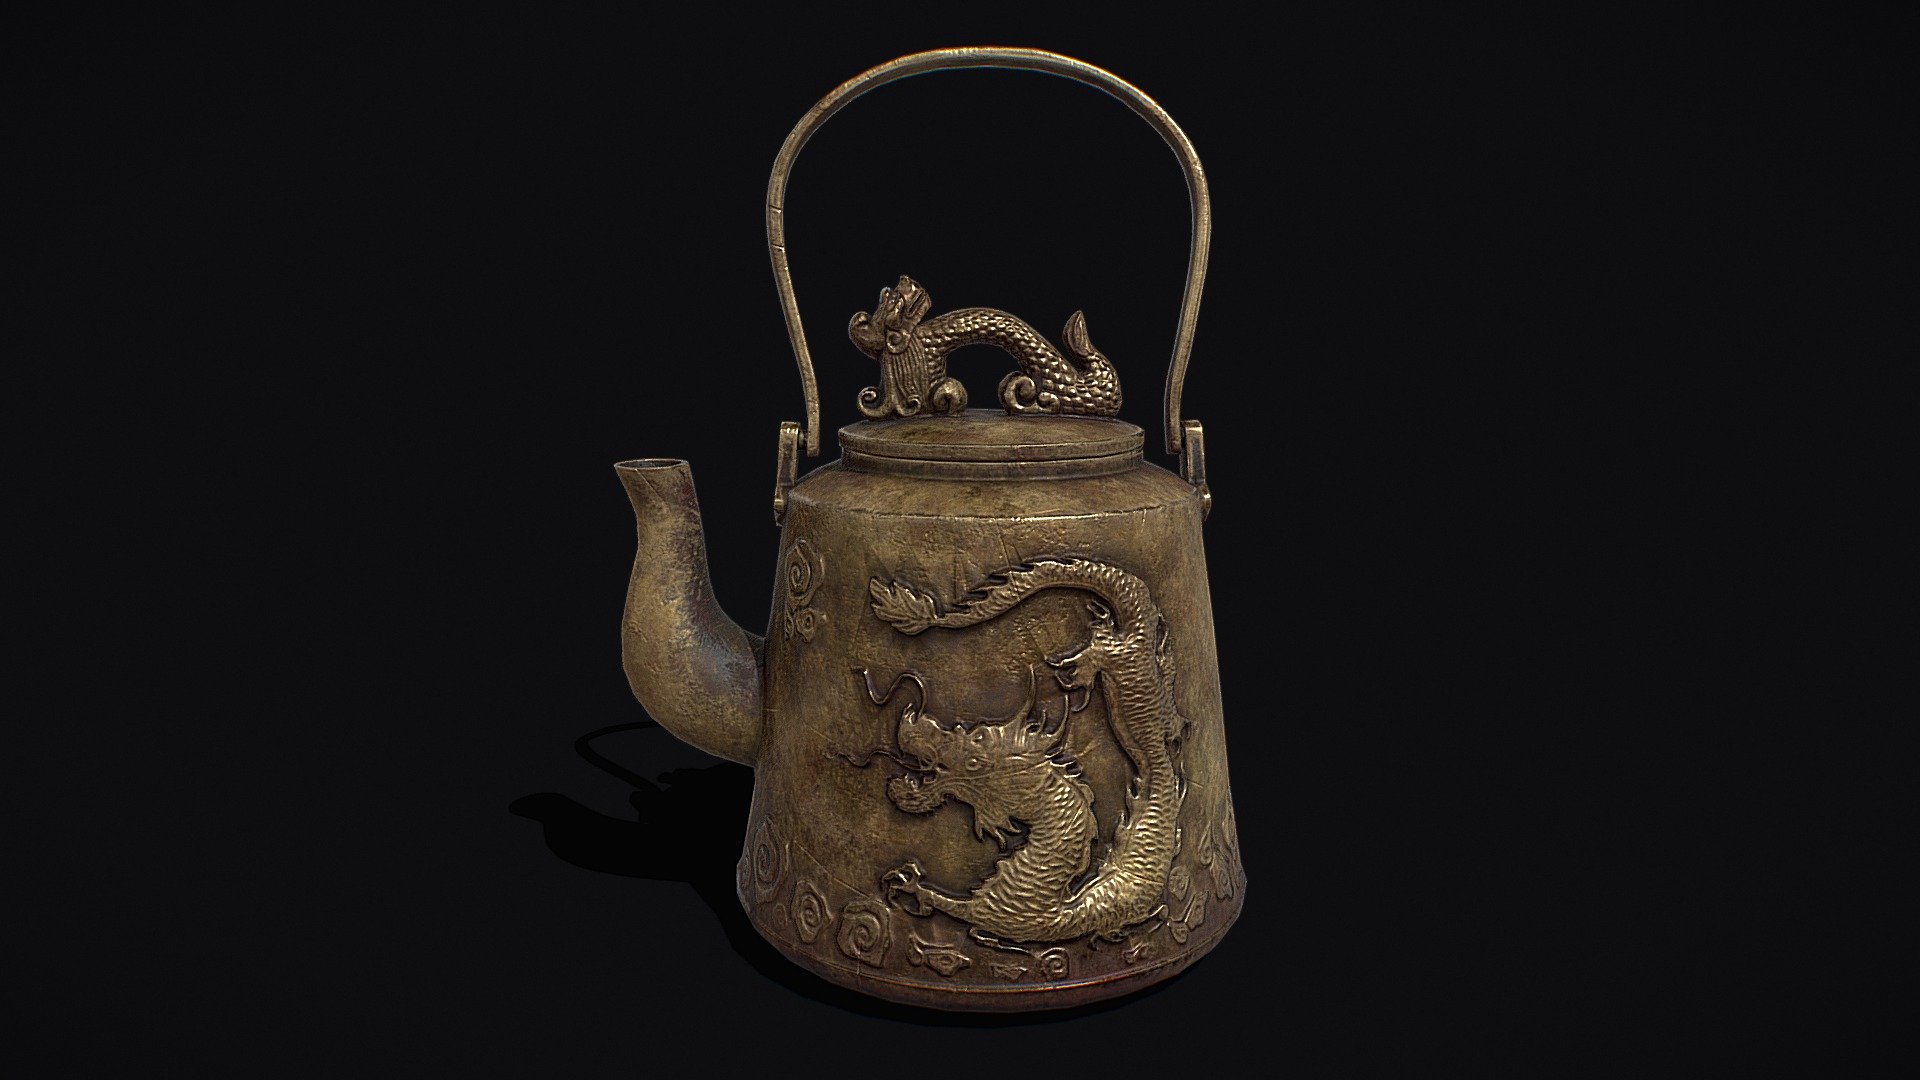 Antique Chinese Dragon Teapot 3D Model PBR Texture available in 4096 x 4096 Maps include : Basecolor, Height, Normal, Roughness, and Metallic. Customer Service Guaranteed. From the Creators at Get Dead Entertainment. Brief Teapot History: The teapot was invented in China during the Yuan Dynasty. It was probably derived from ceramic kettles and wine pots, which were made of bronze and other metals and were a feature of Chinese life for thousands of years. &hellip; In the Tang Dynasty, a cauldron was used to boil ground tea, which was served in bowls. The world owes tea to the Chinese, but the design of the teapot to the Europeans. The first ceramic teapots were heavy with short straight replaceable spouts. These teapots broke easily, so at the beginning of the 18th century the East India Company (the main tea importers) commissioned Chinese artists to create teapots to the company's design 3d model